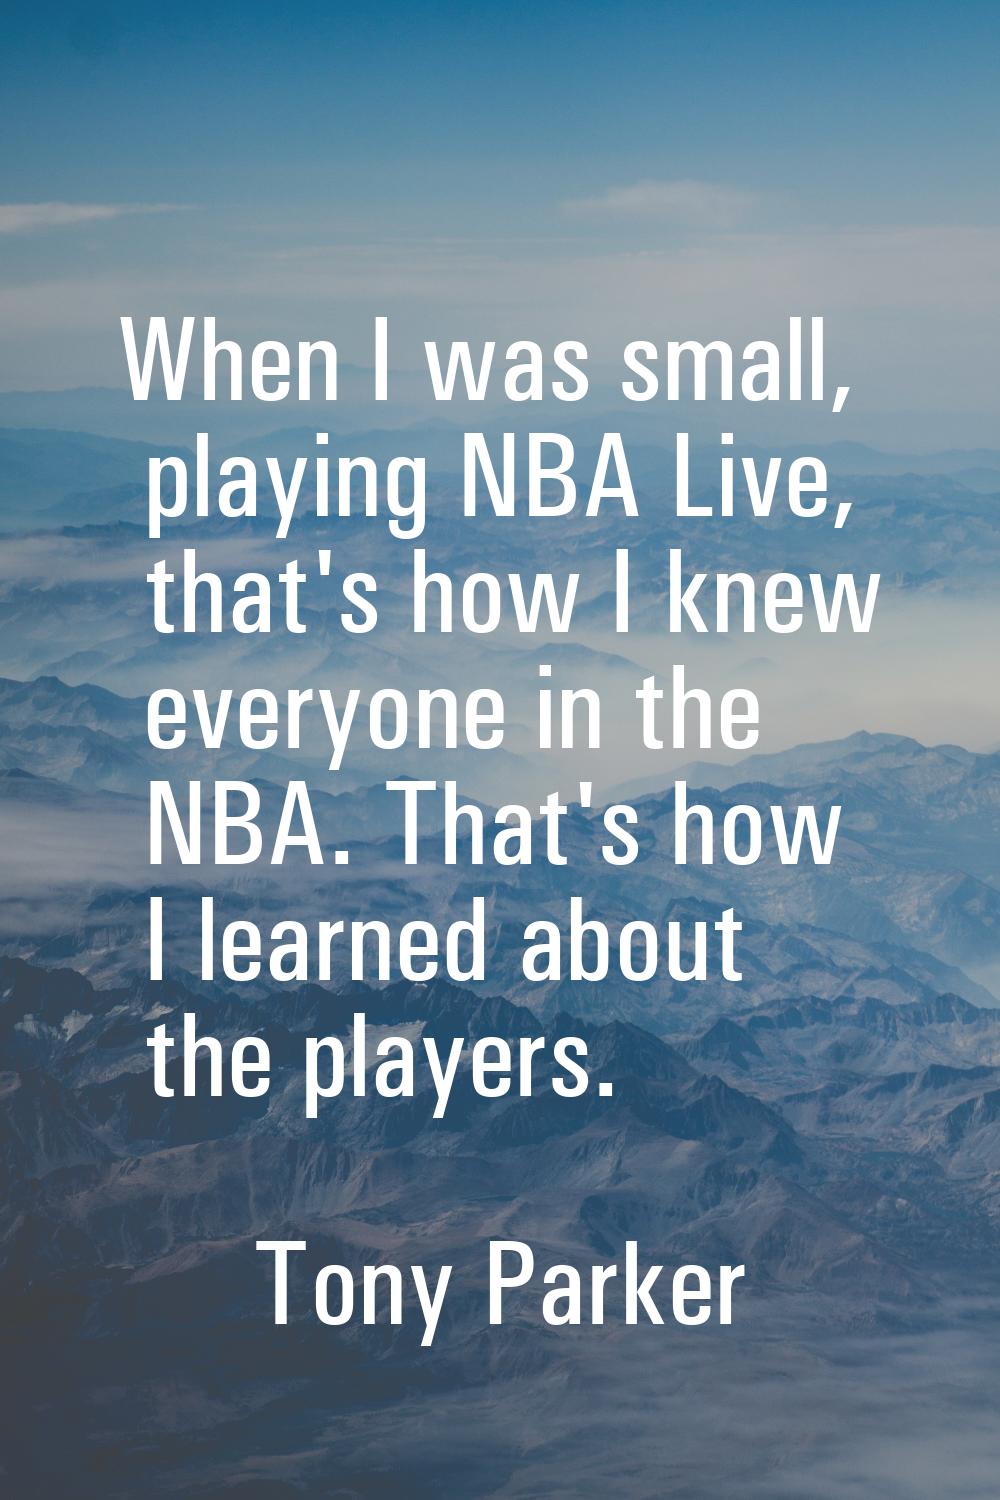 When I was small, playing NBA Live, that's how I knew everyone in the NBA. That's how I learned abo